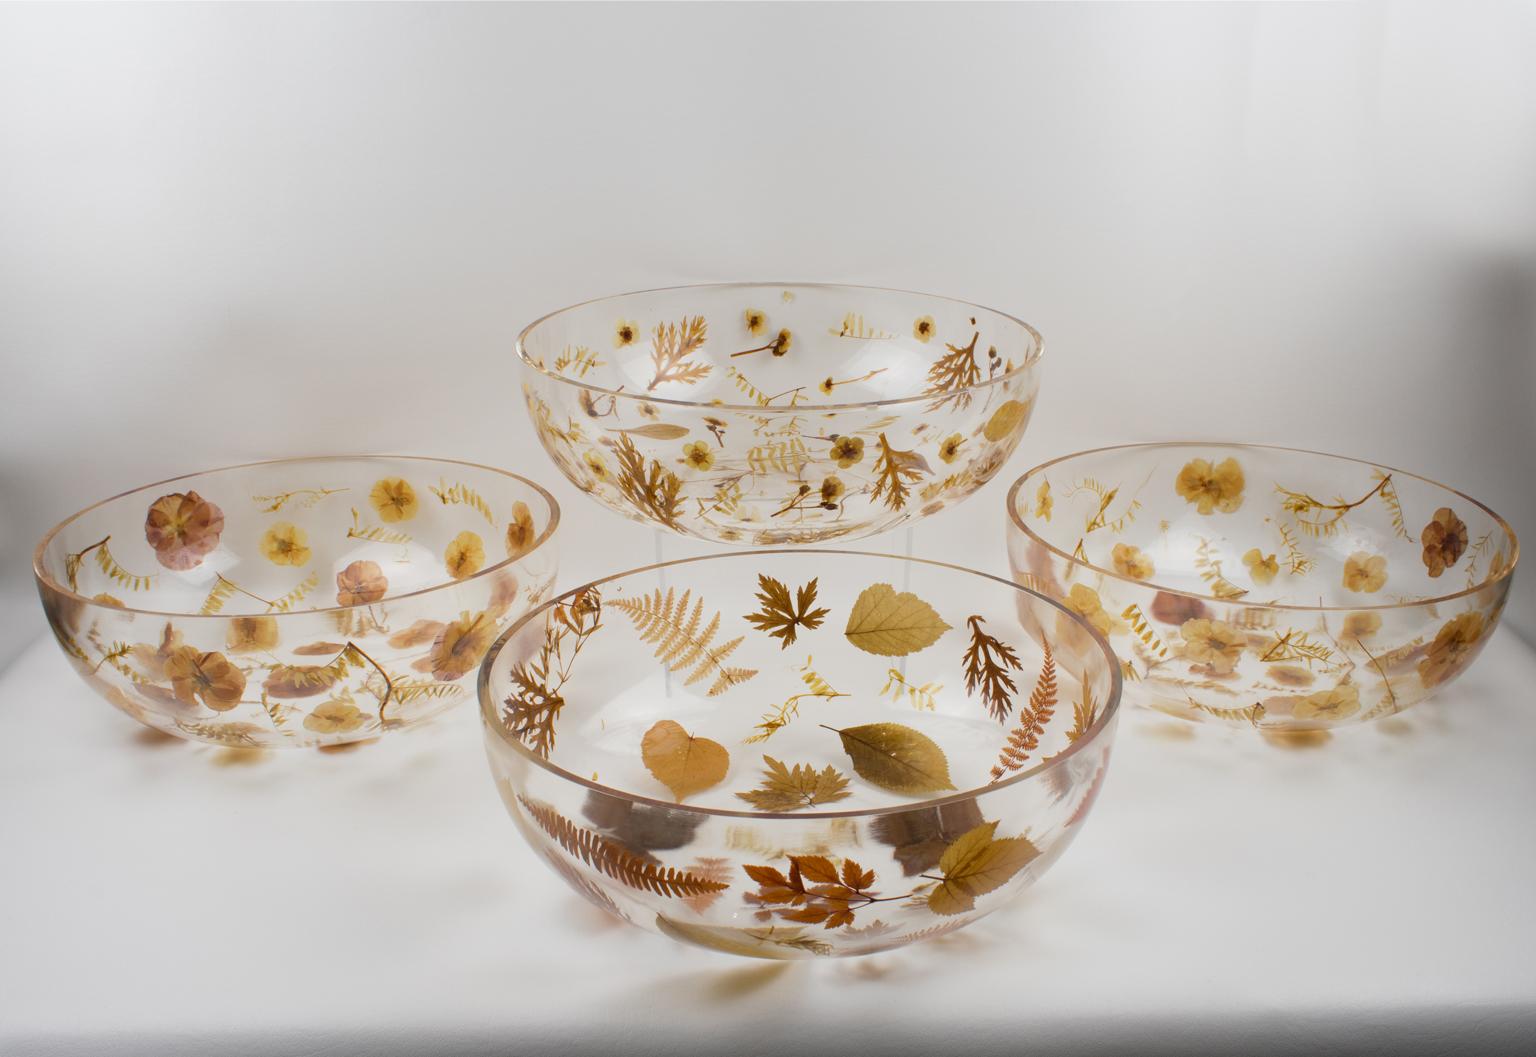 Late 20th Century 1970s Italian Resin Bowl Centerpiece with Leaves and Flowers Inclusions